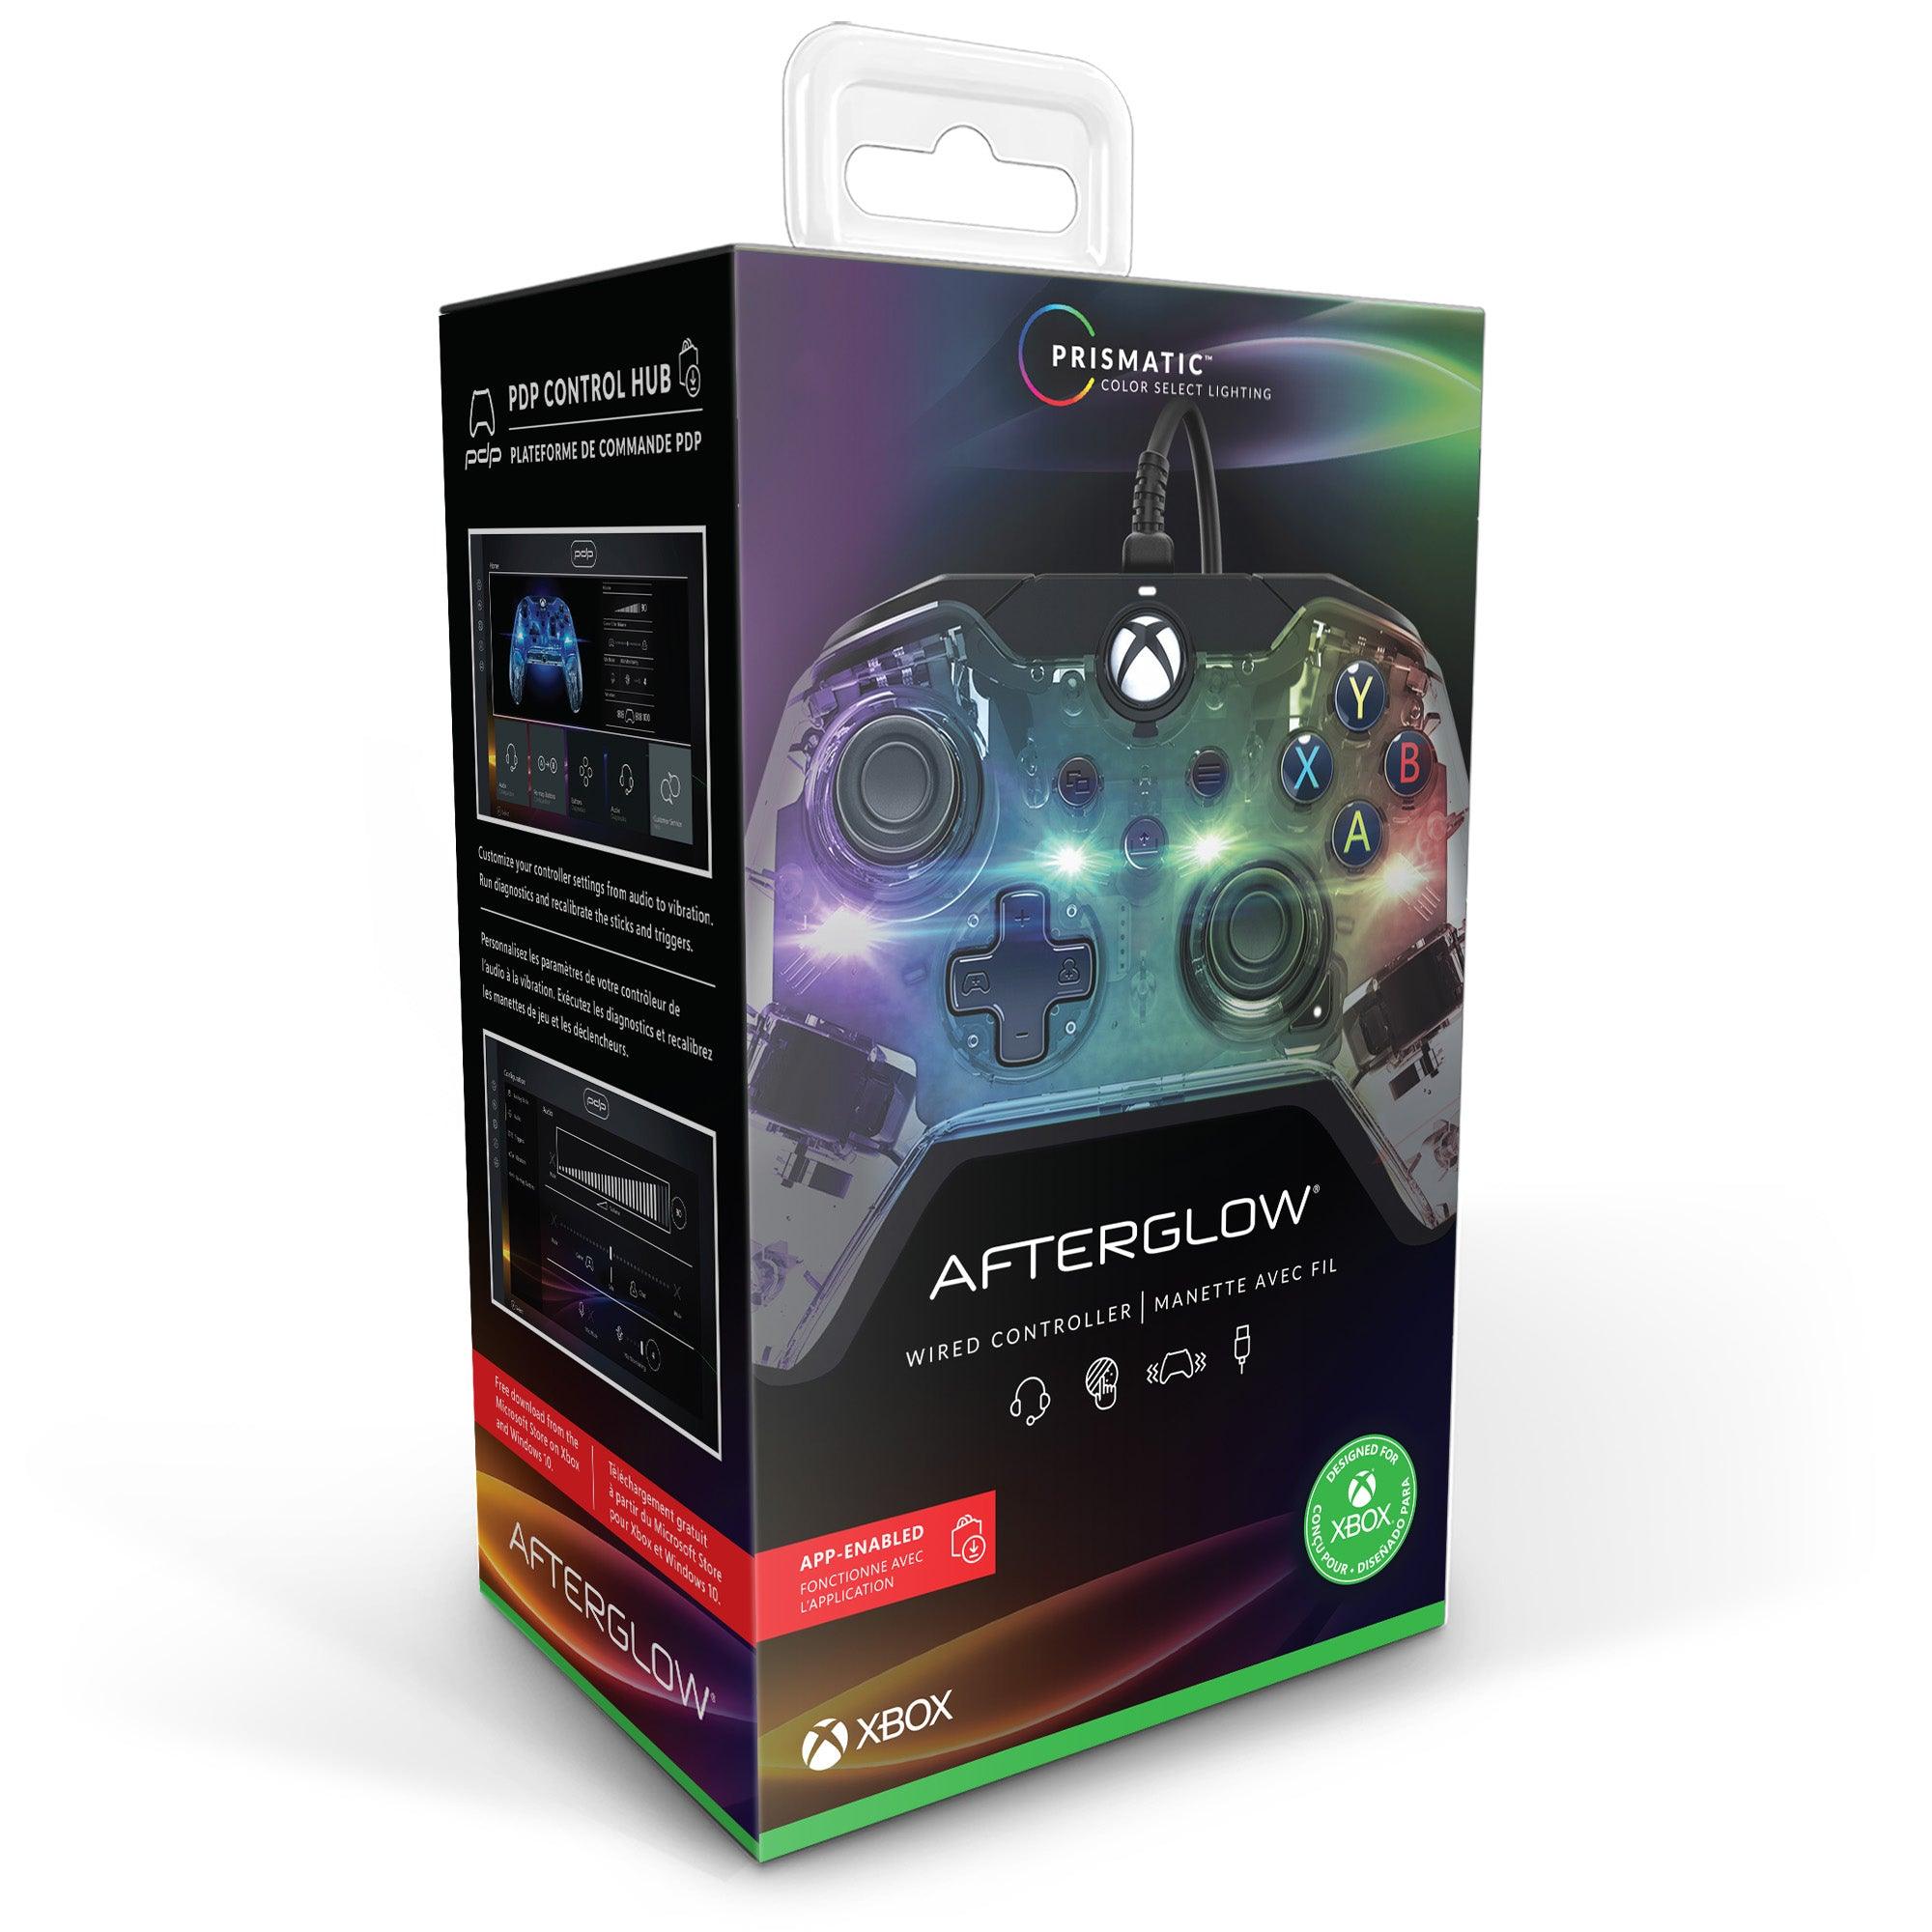 Ag Prismatic Wired Controller - Want a New Gadget